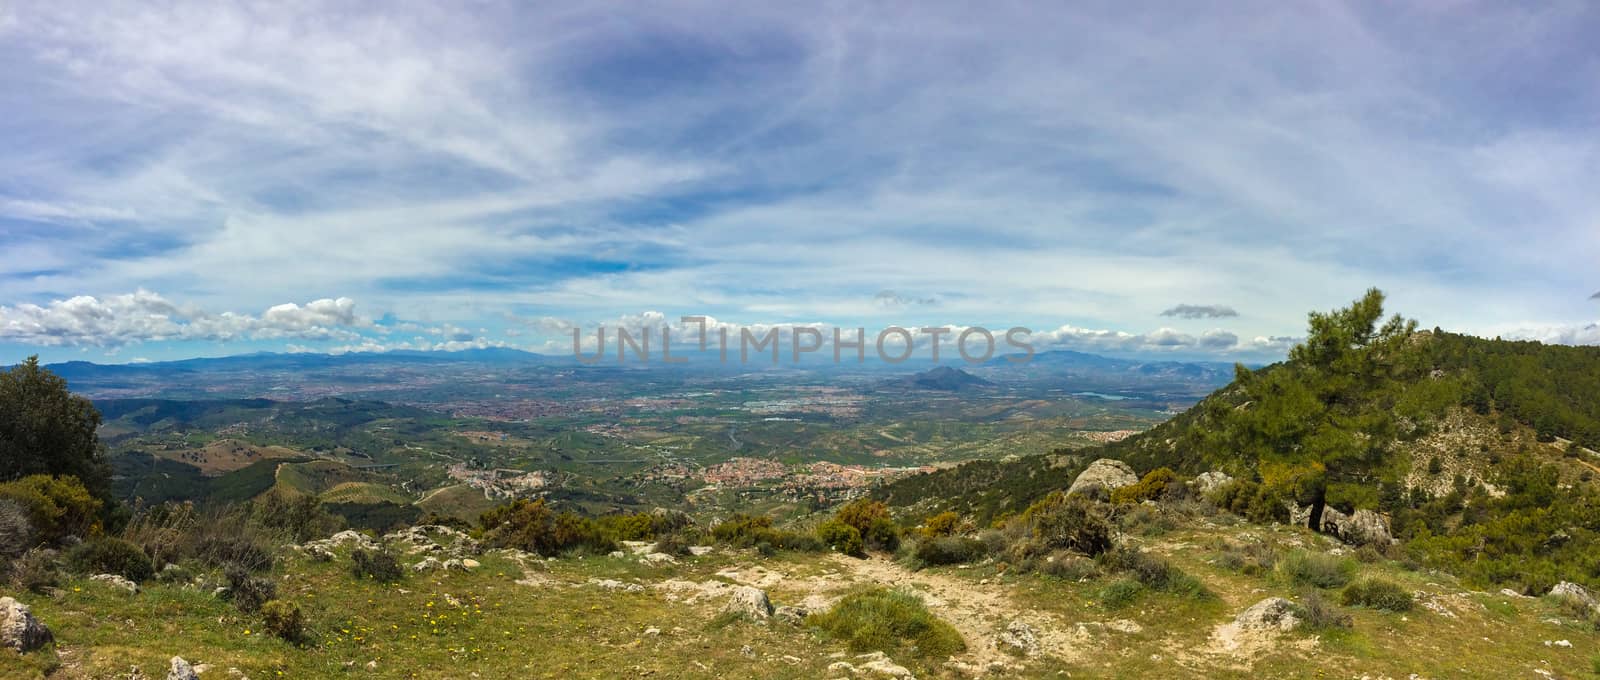 Sierra Nevada, Spain, landscape and nature in panorama by kb79